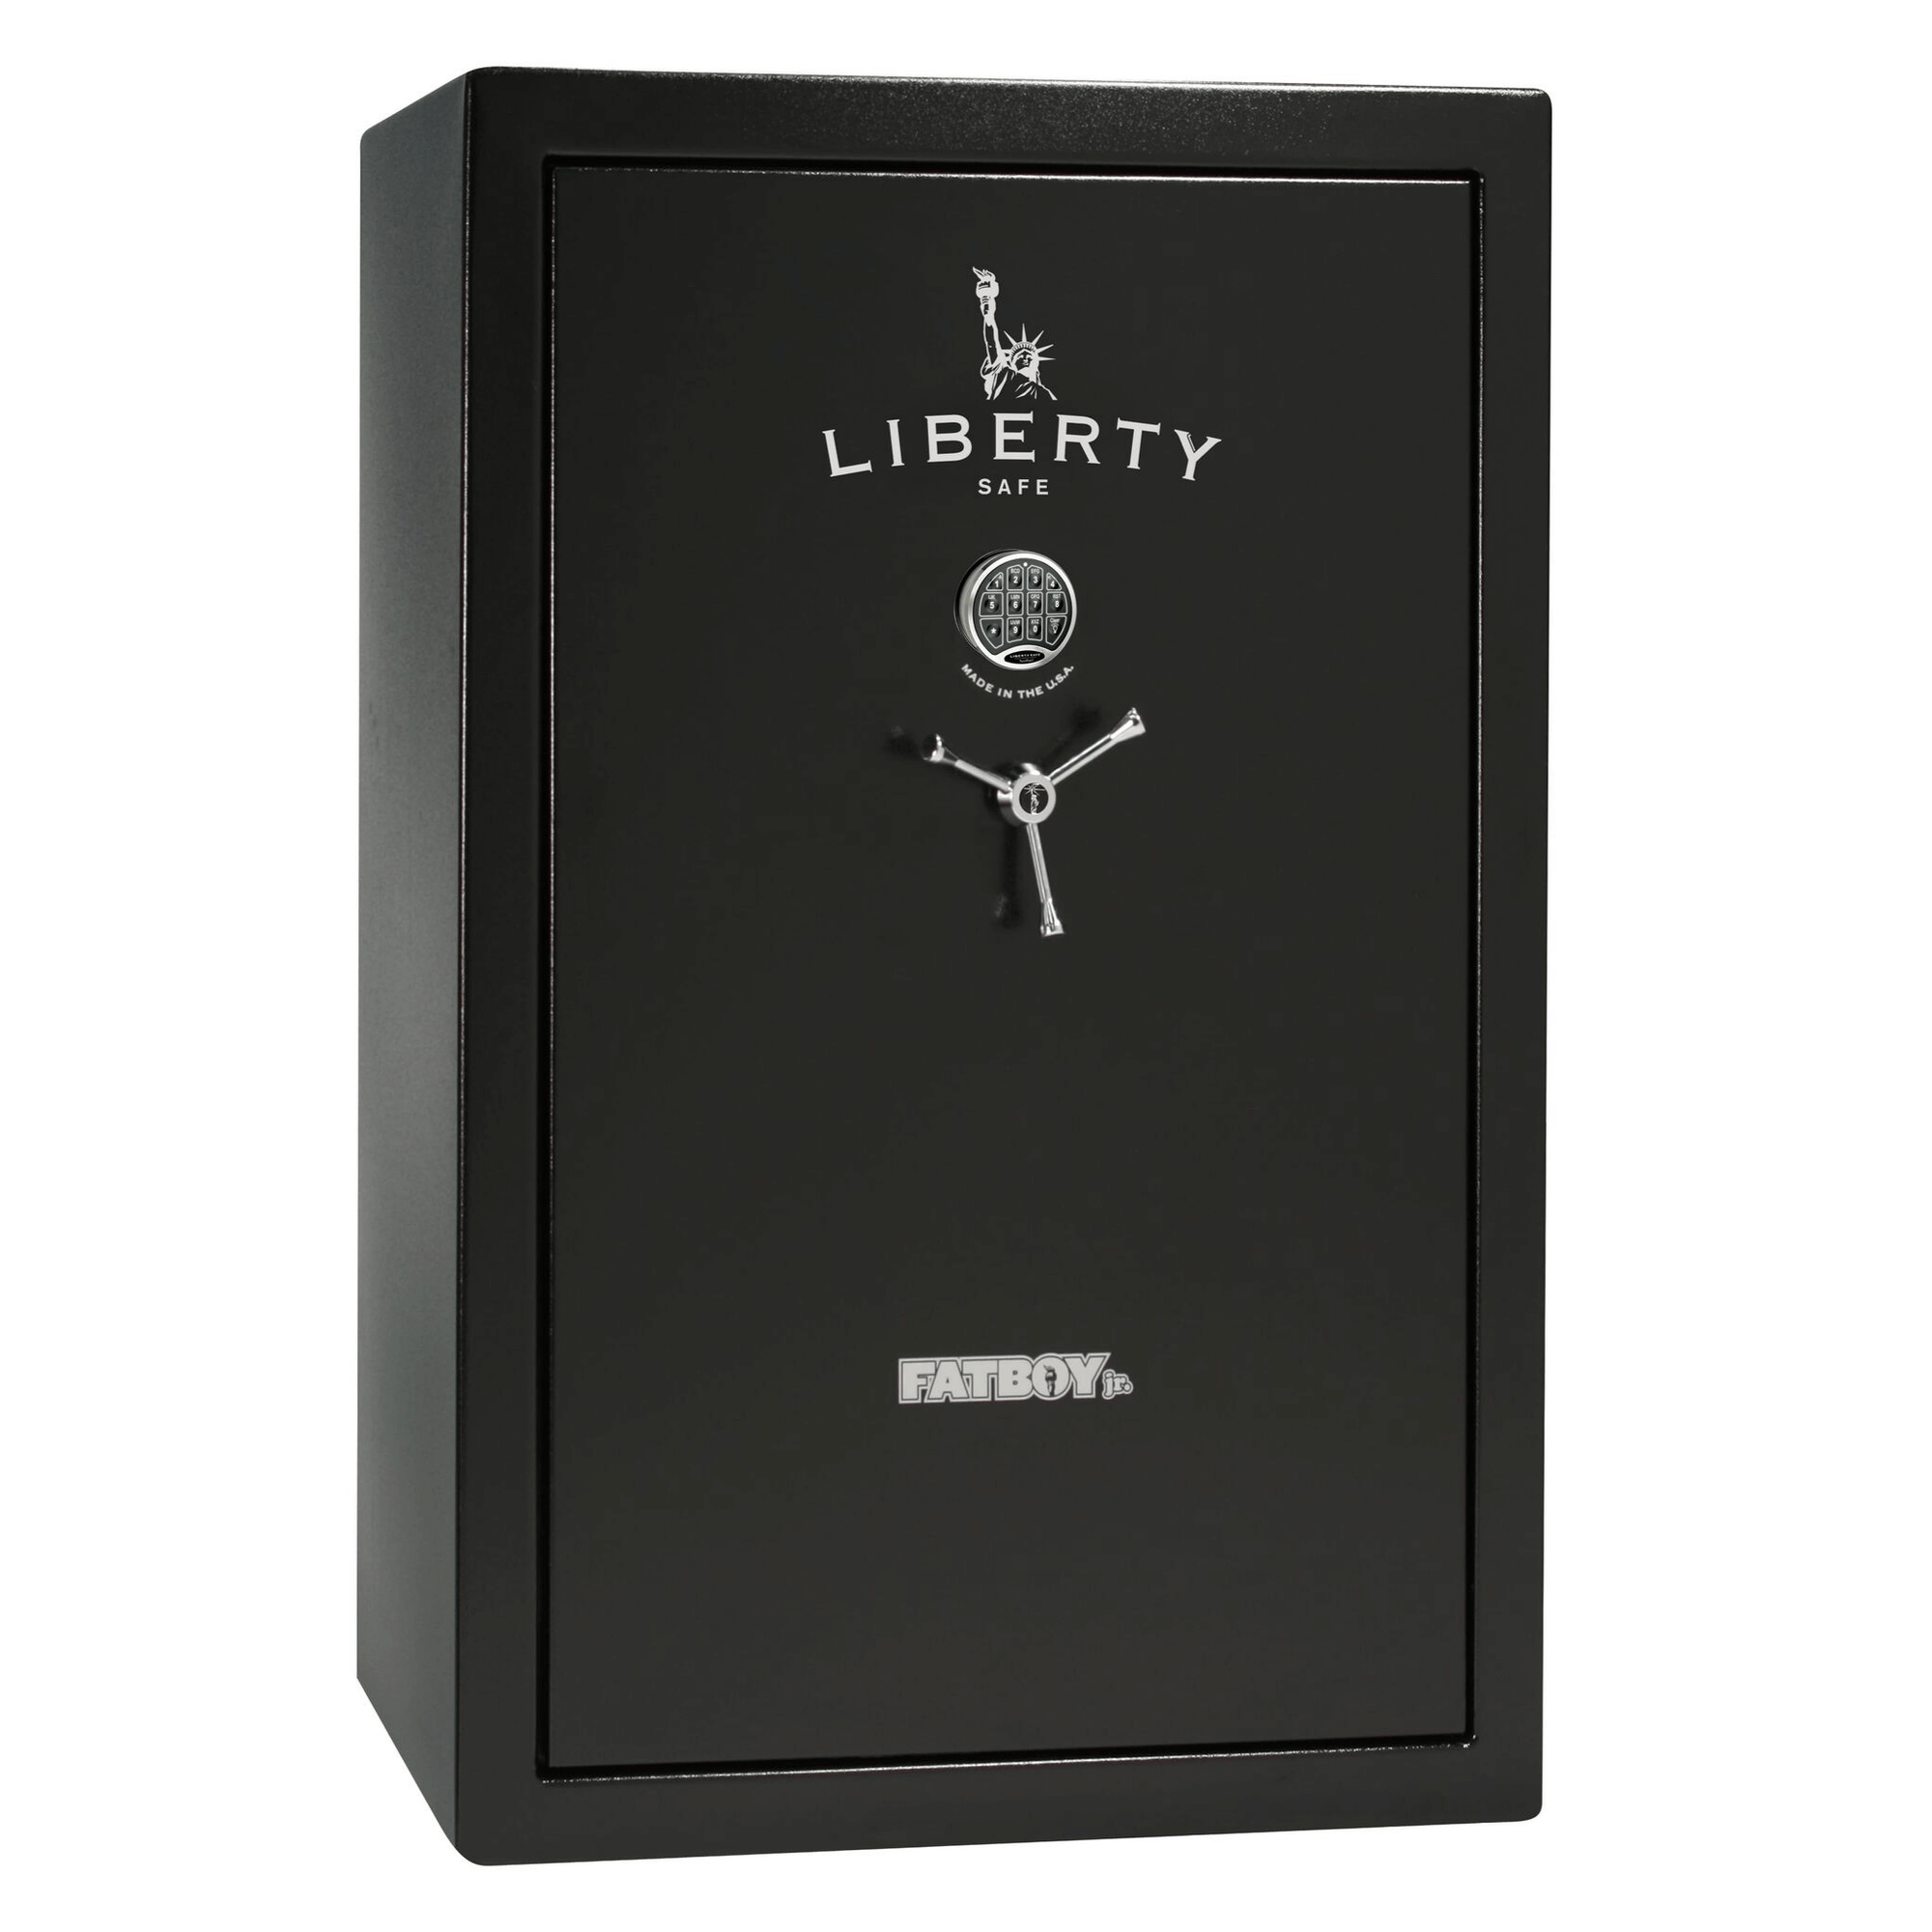 Fatboy Jr. Extreme Series | Level 4 Security | 75 Minute Fire Protection | Liberty Safe Norcal.